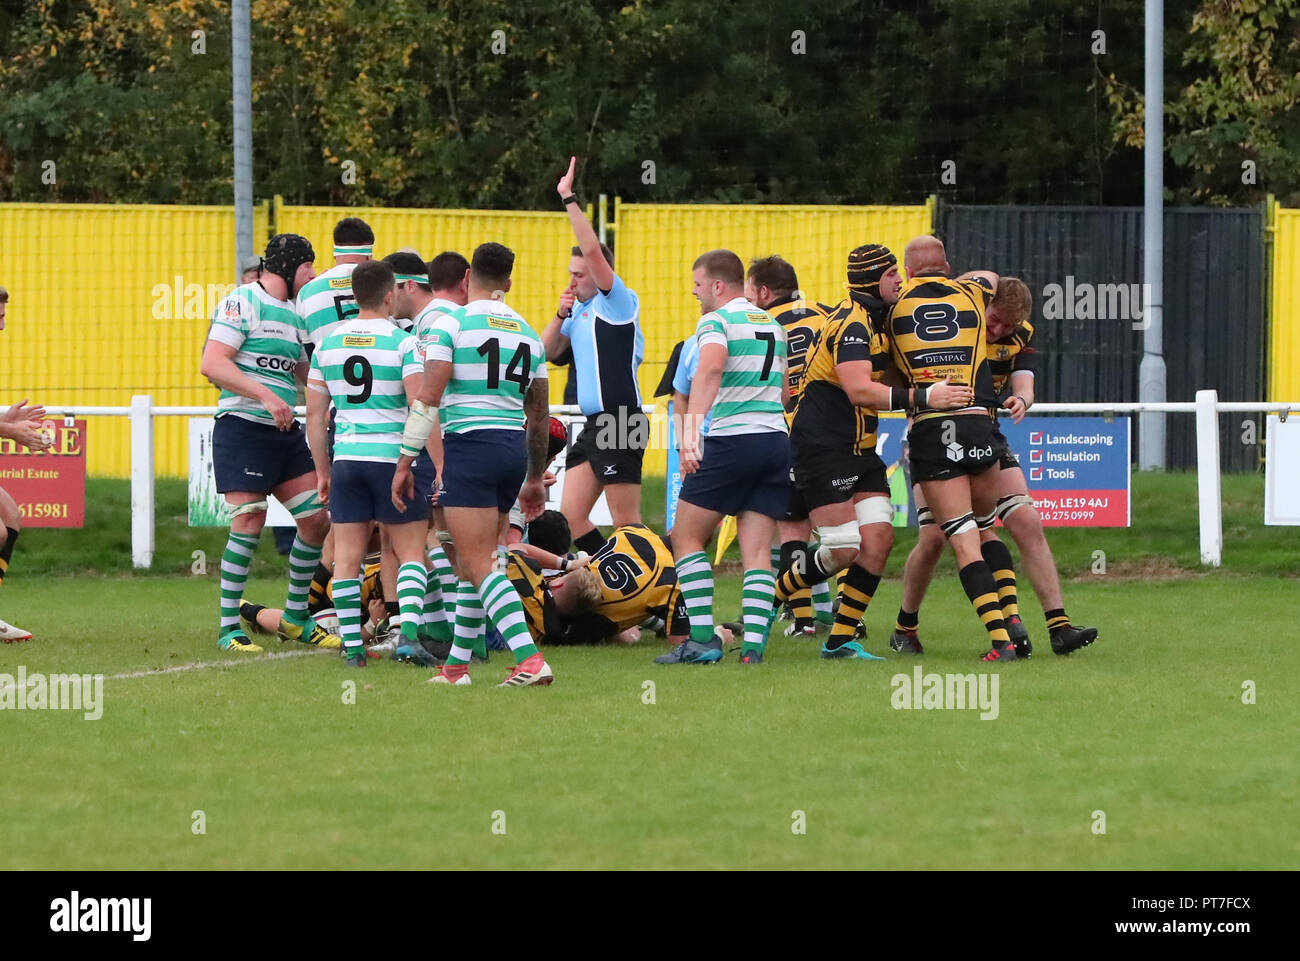 Leicester, England. Rugby Union, Hinckley rfc v South Leicester rfc.   Gareth Turner appears from below a push-over try for Hinckley after 44 minutes    during the RFU National League 2 North (NL2N) game played at the Leicester  Road Stadium.  © Phil Hutchinson / Alamy Live News Stock Photo